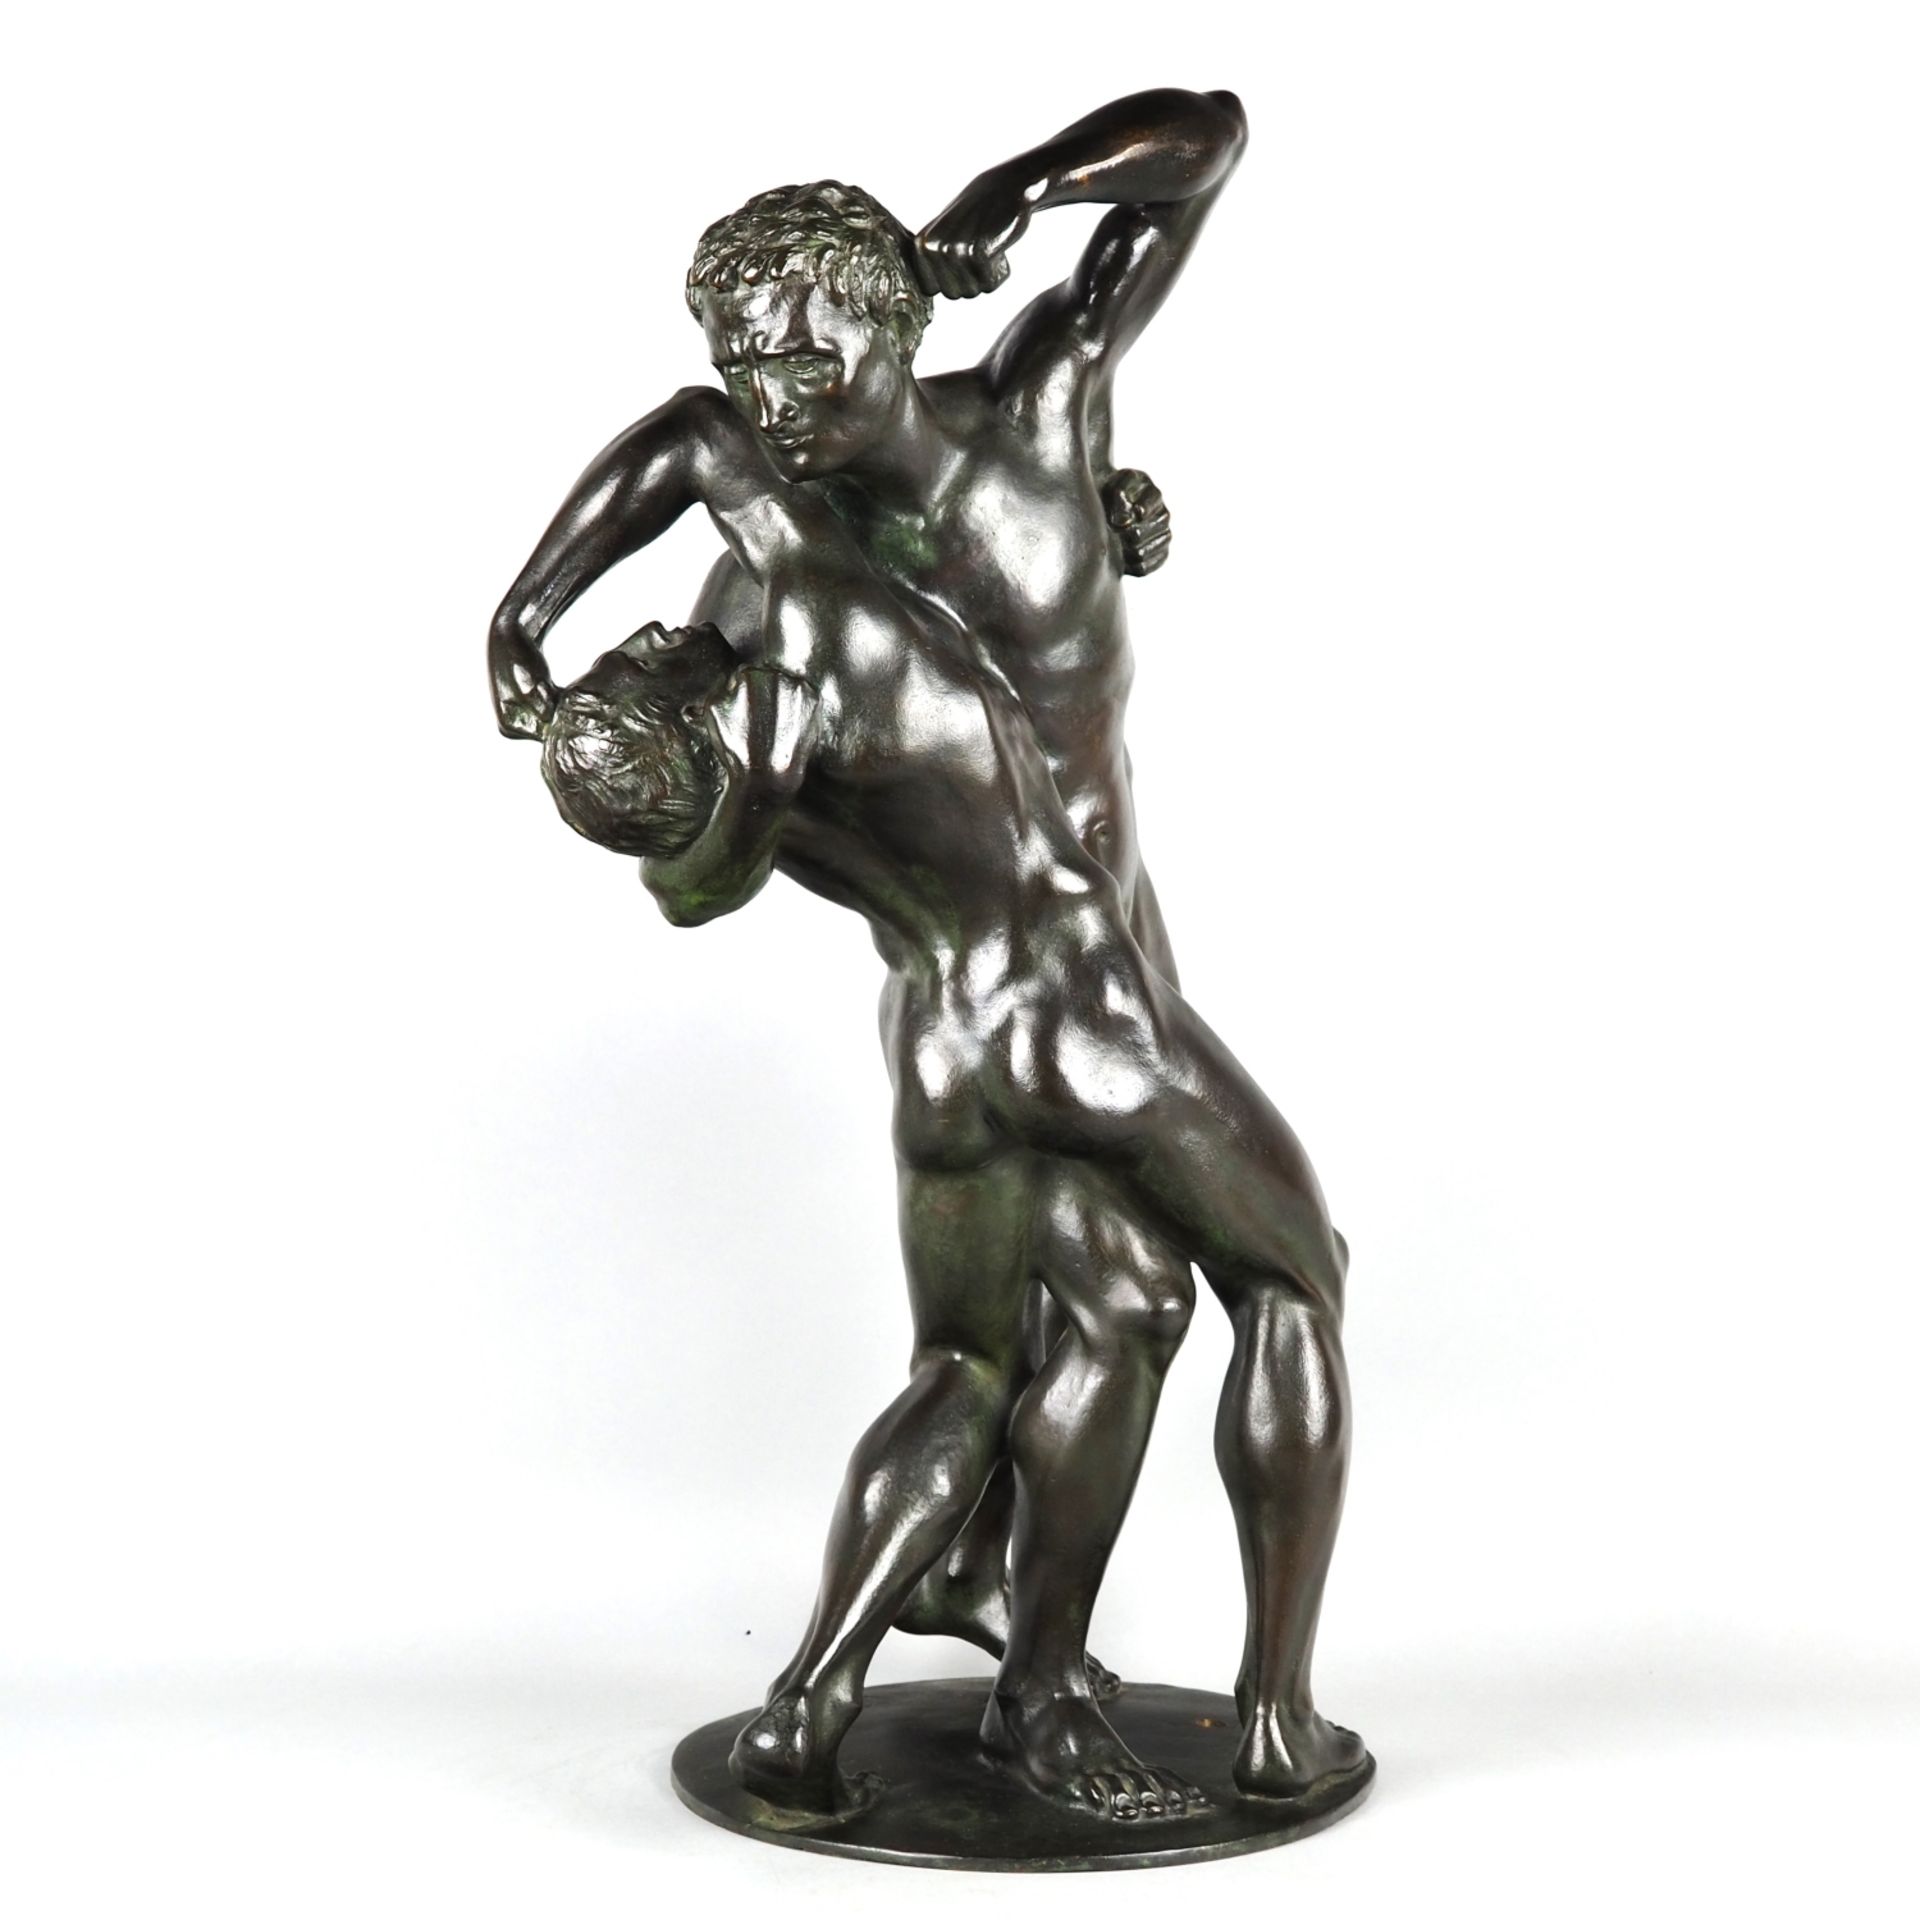 Imposing figure group of fighting male nudes made of bronze by Wilhelm Julius Frick beginning 20th 